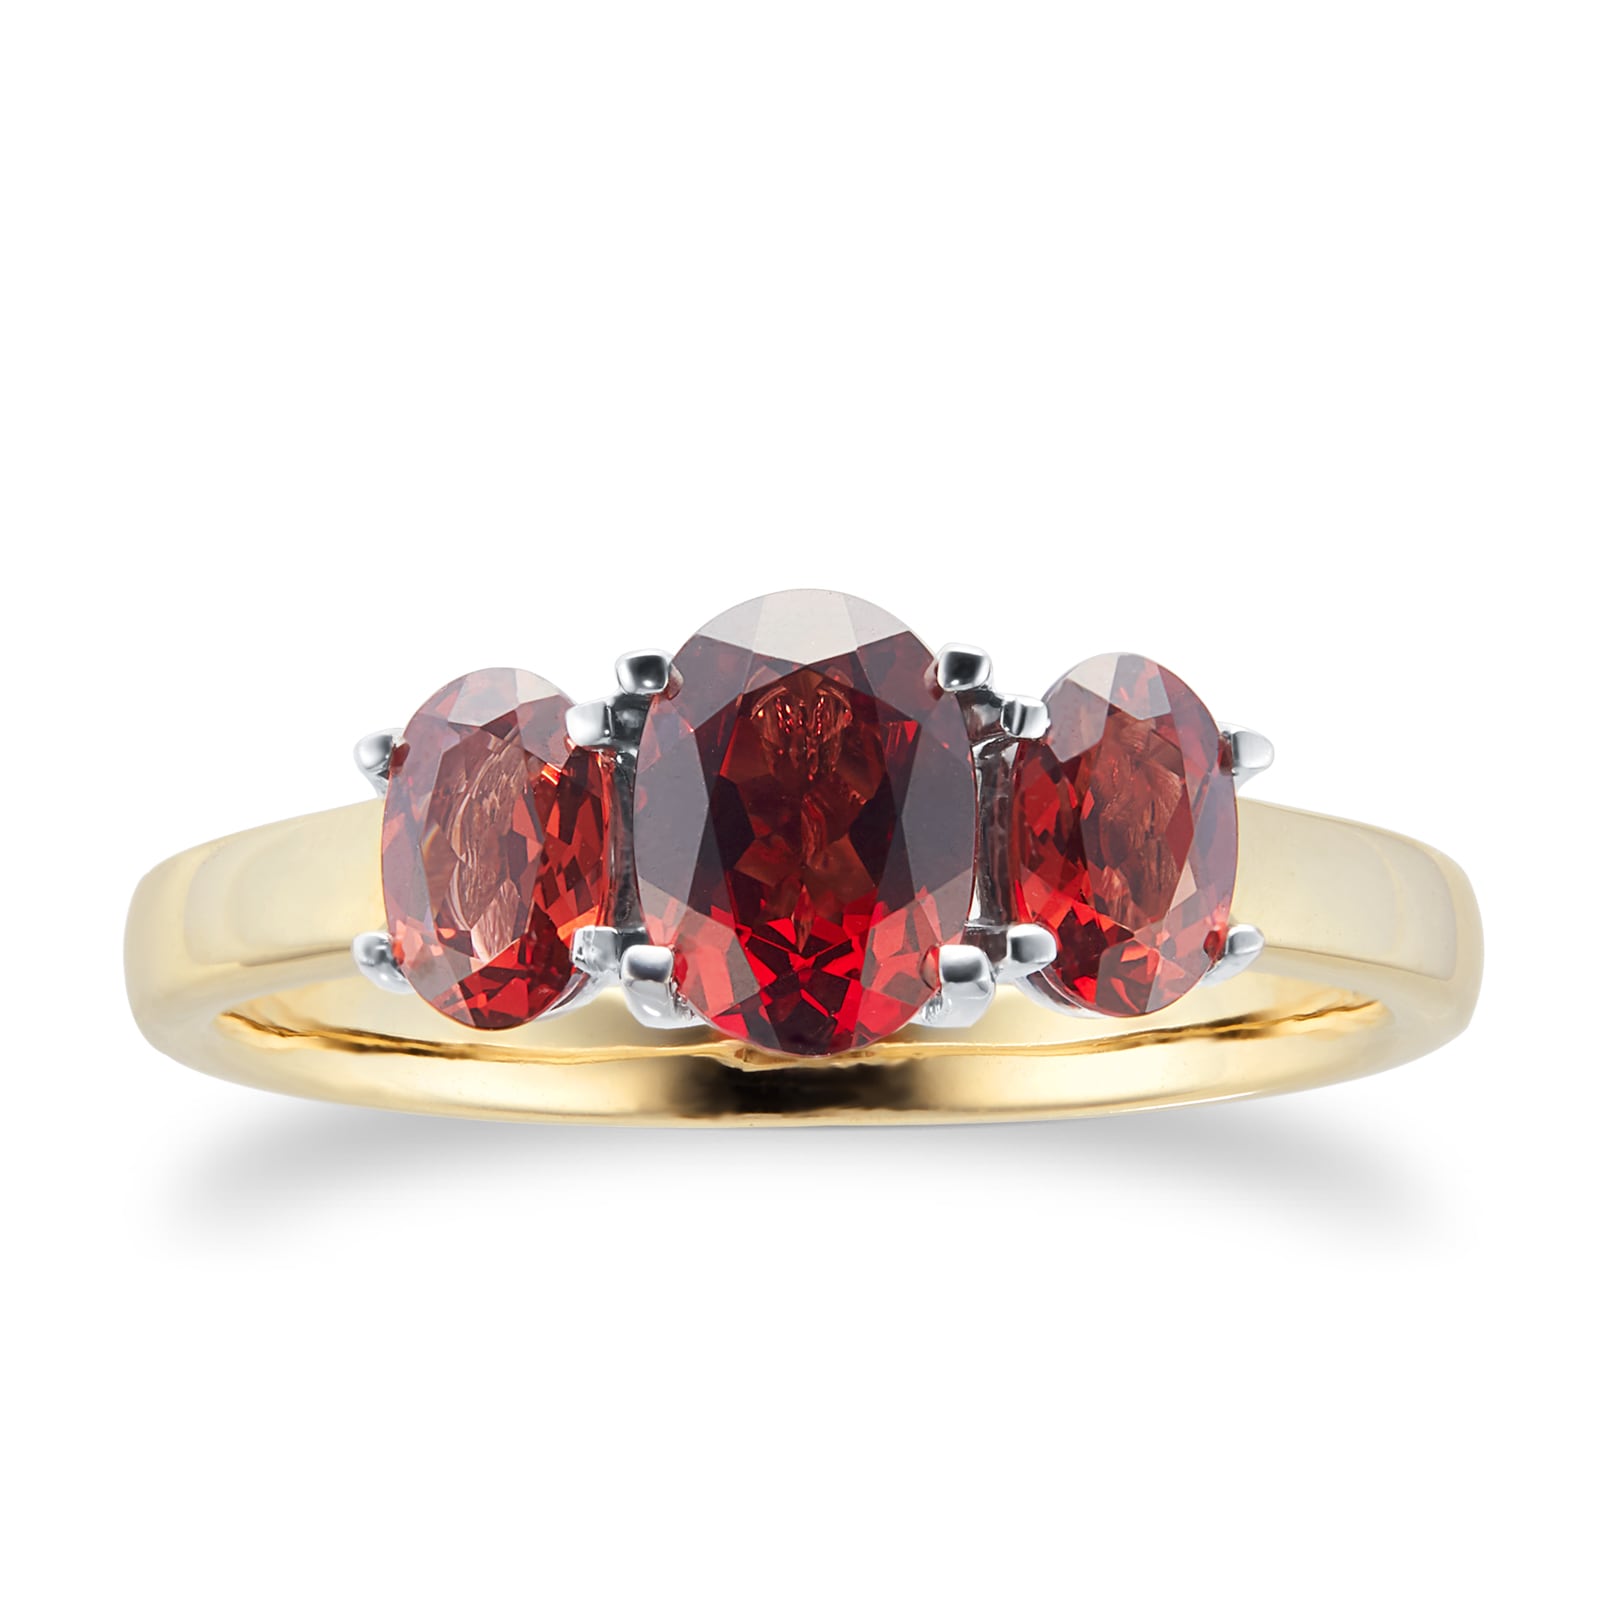 9ct Yellow and White Gold 3 Stone Garnet Ring - Ring Size B